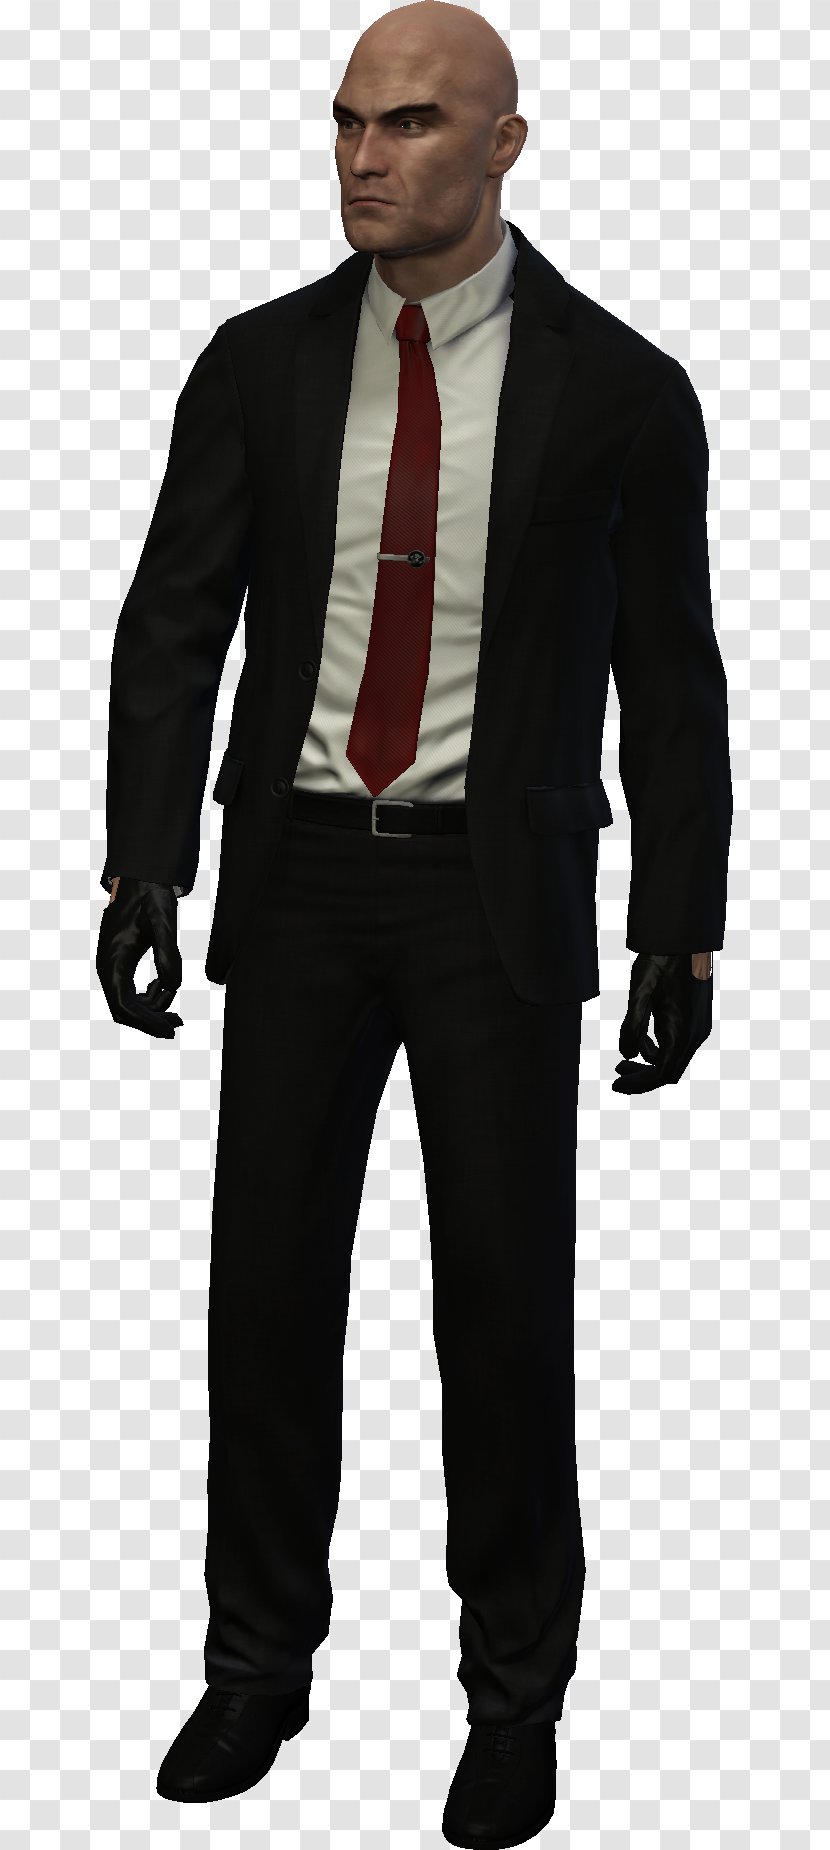 Hitman: Absolution Timothy Olyphant Agent 47 - Hitman - Image Transparent PNG